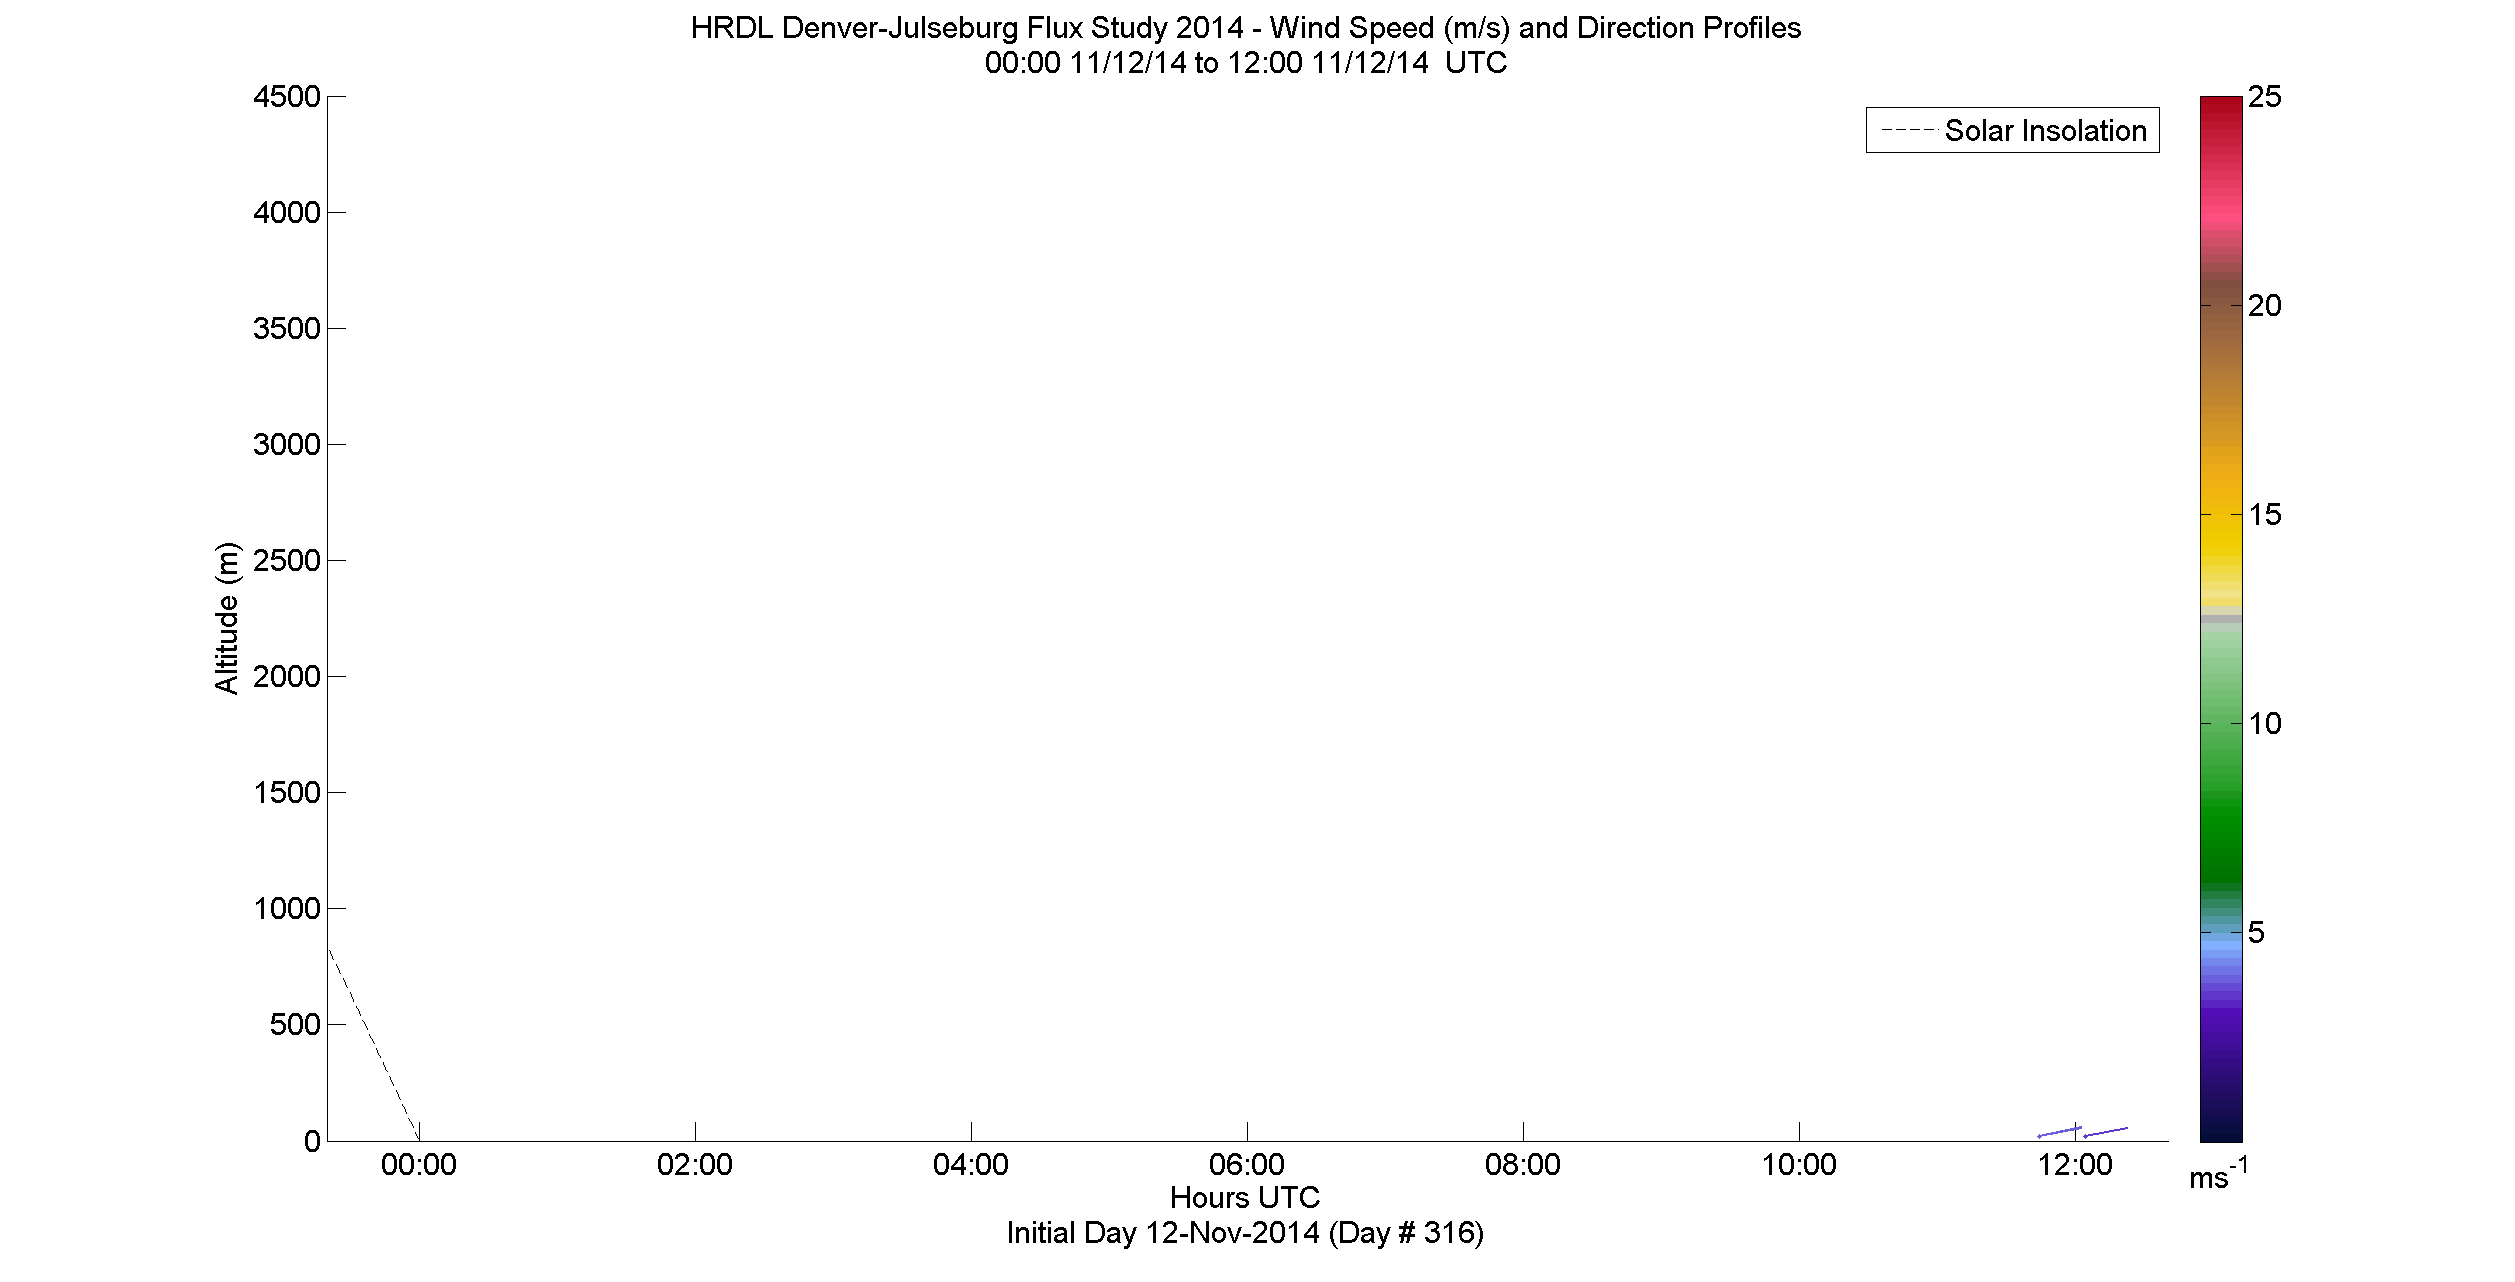 HRDL speed and direction profile - November 12 am